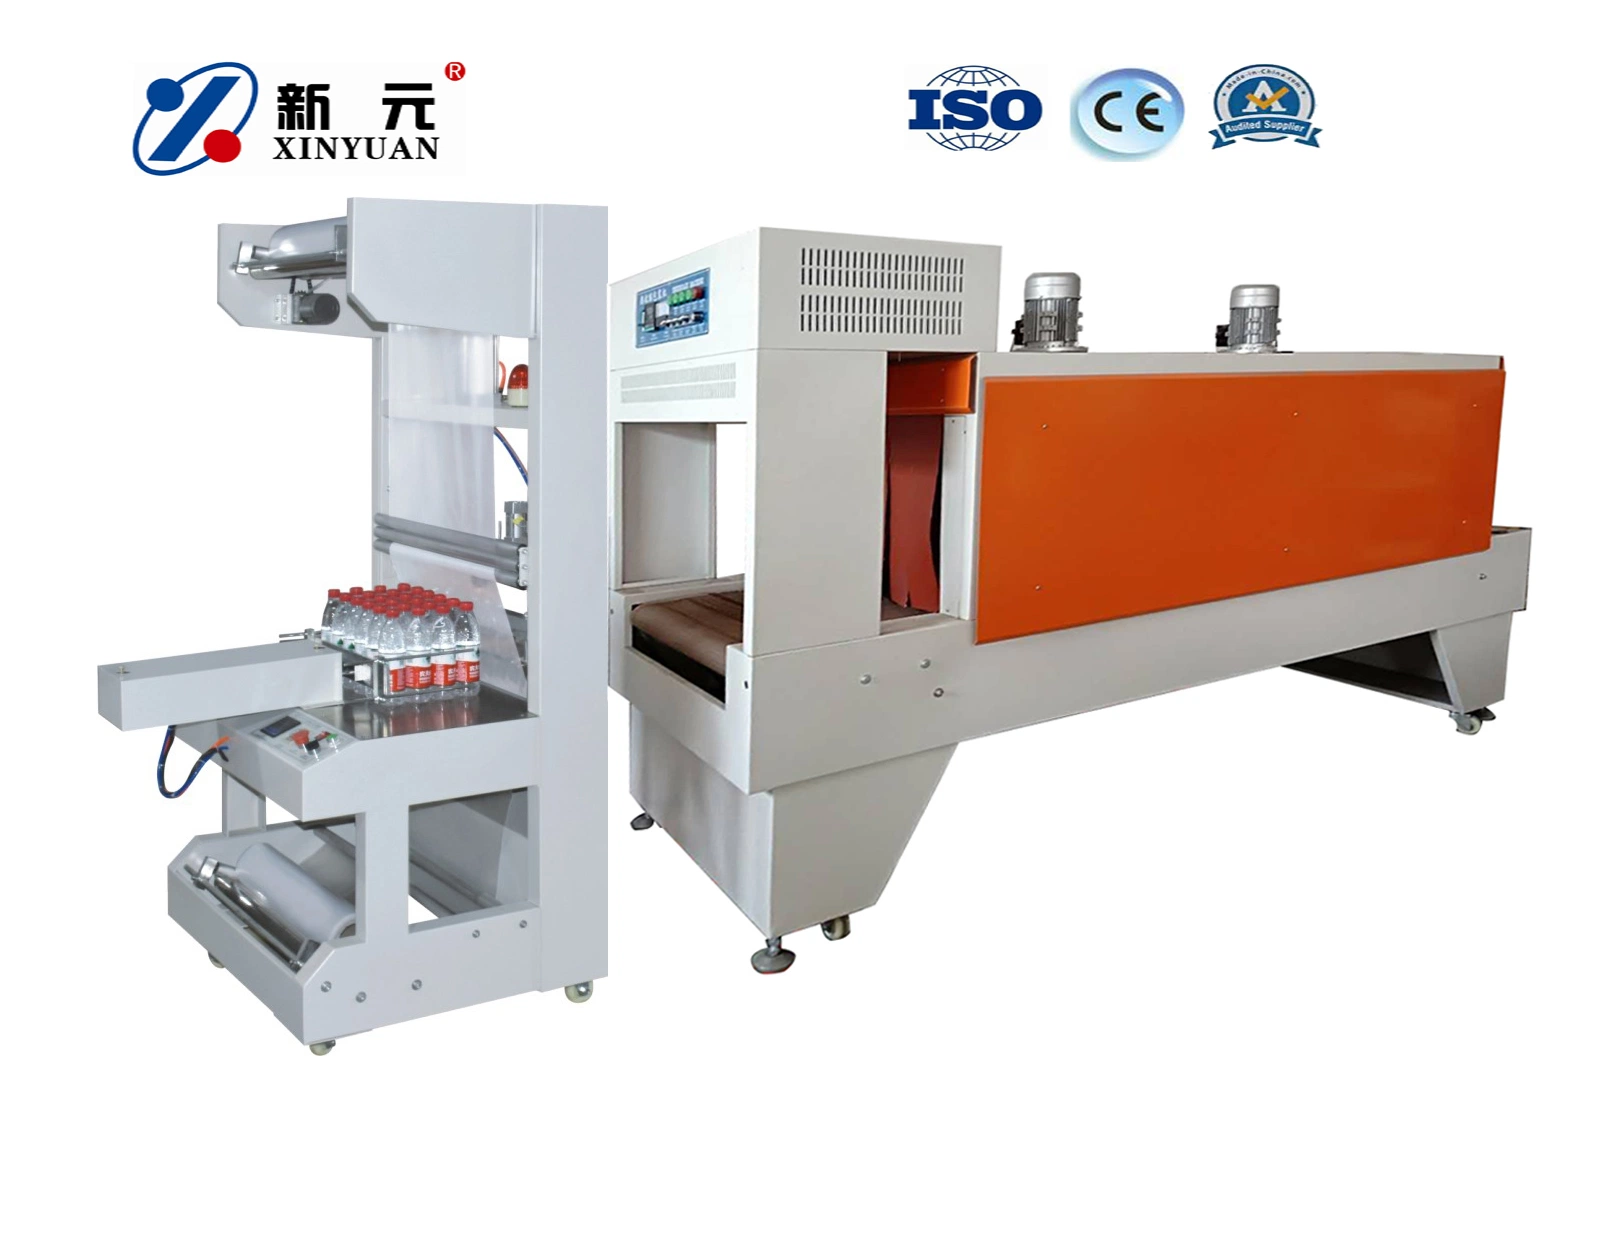 Package Machine Semi Automatic Shrink Wrapping Machine Small/PE Shrink Film Packing for Water Bottling Packaging Line of Shrinking Wrapper